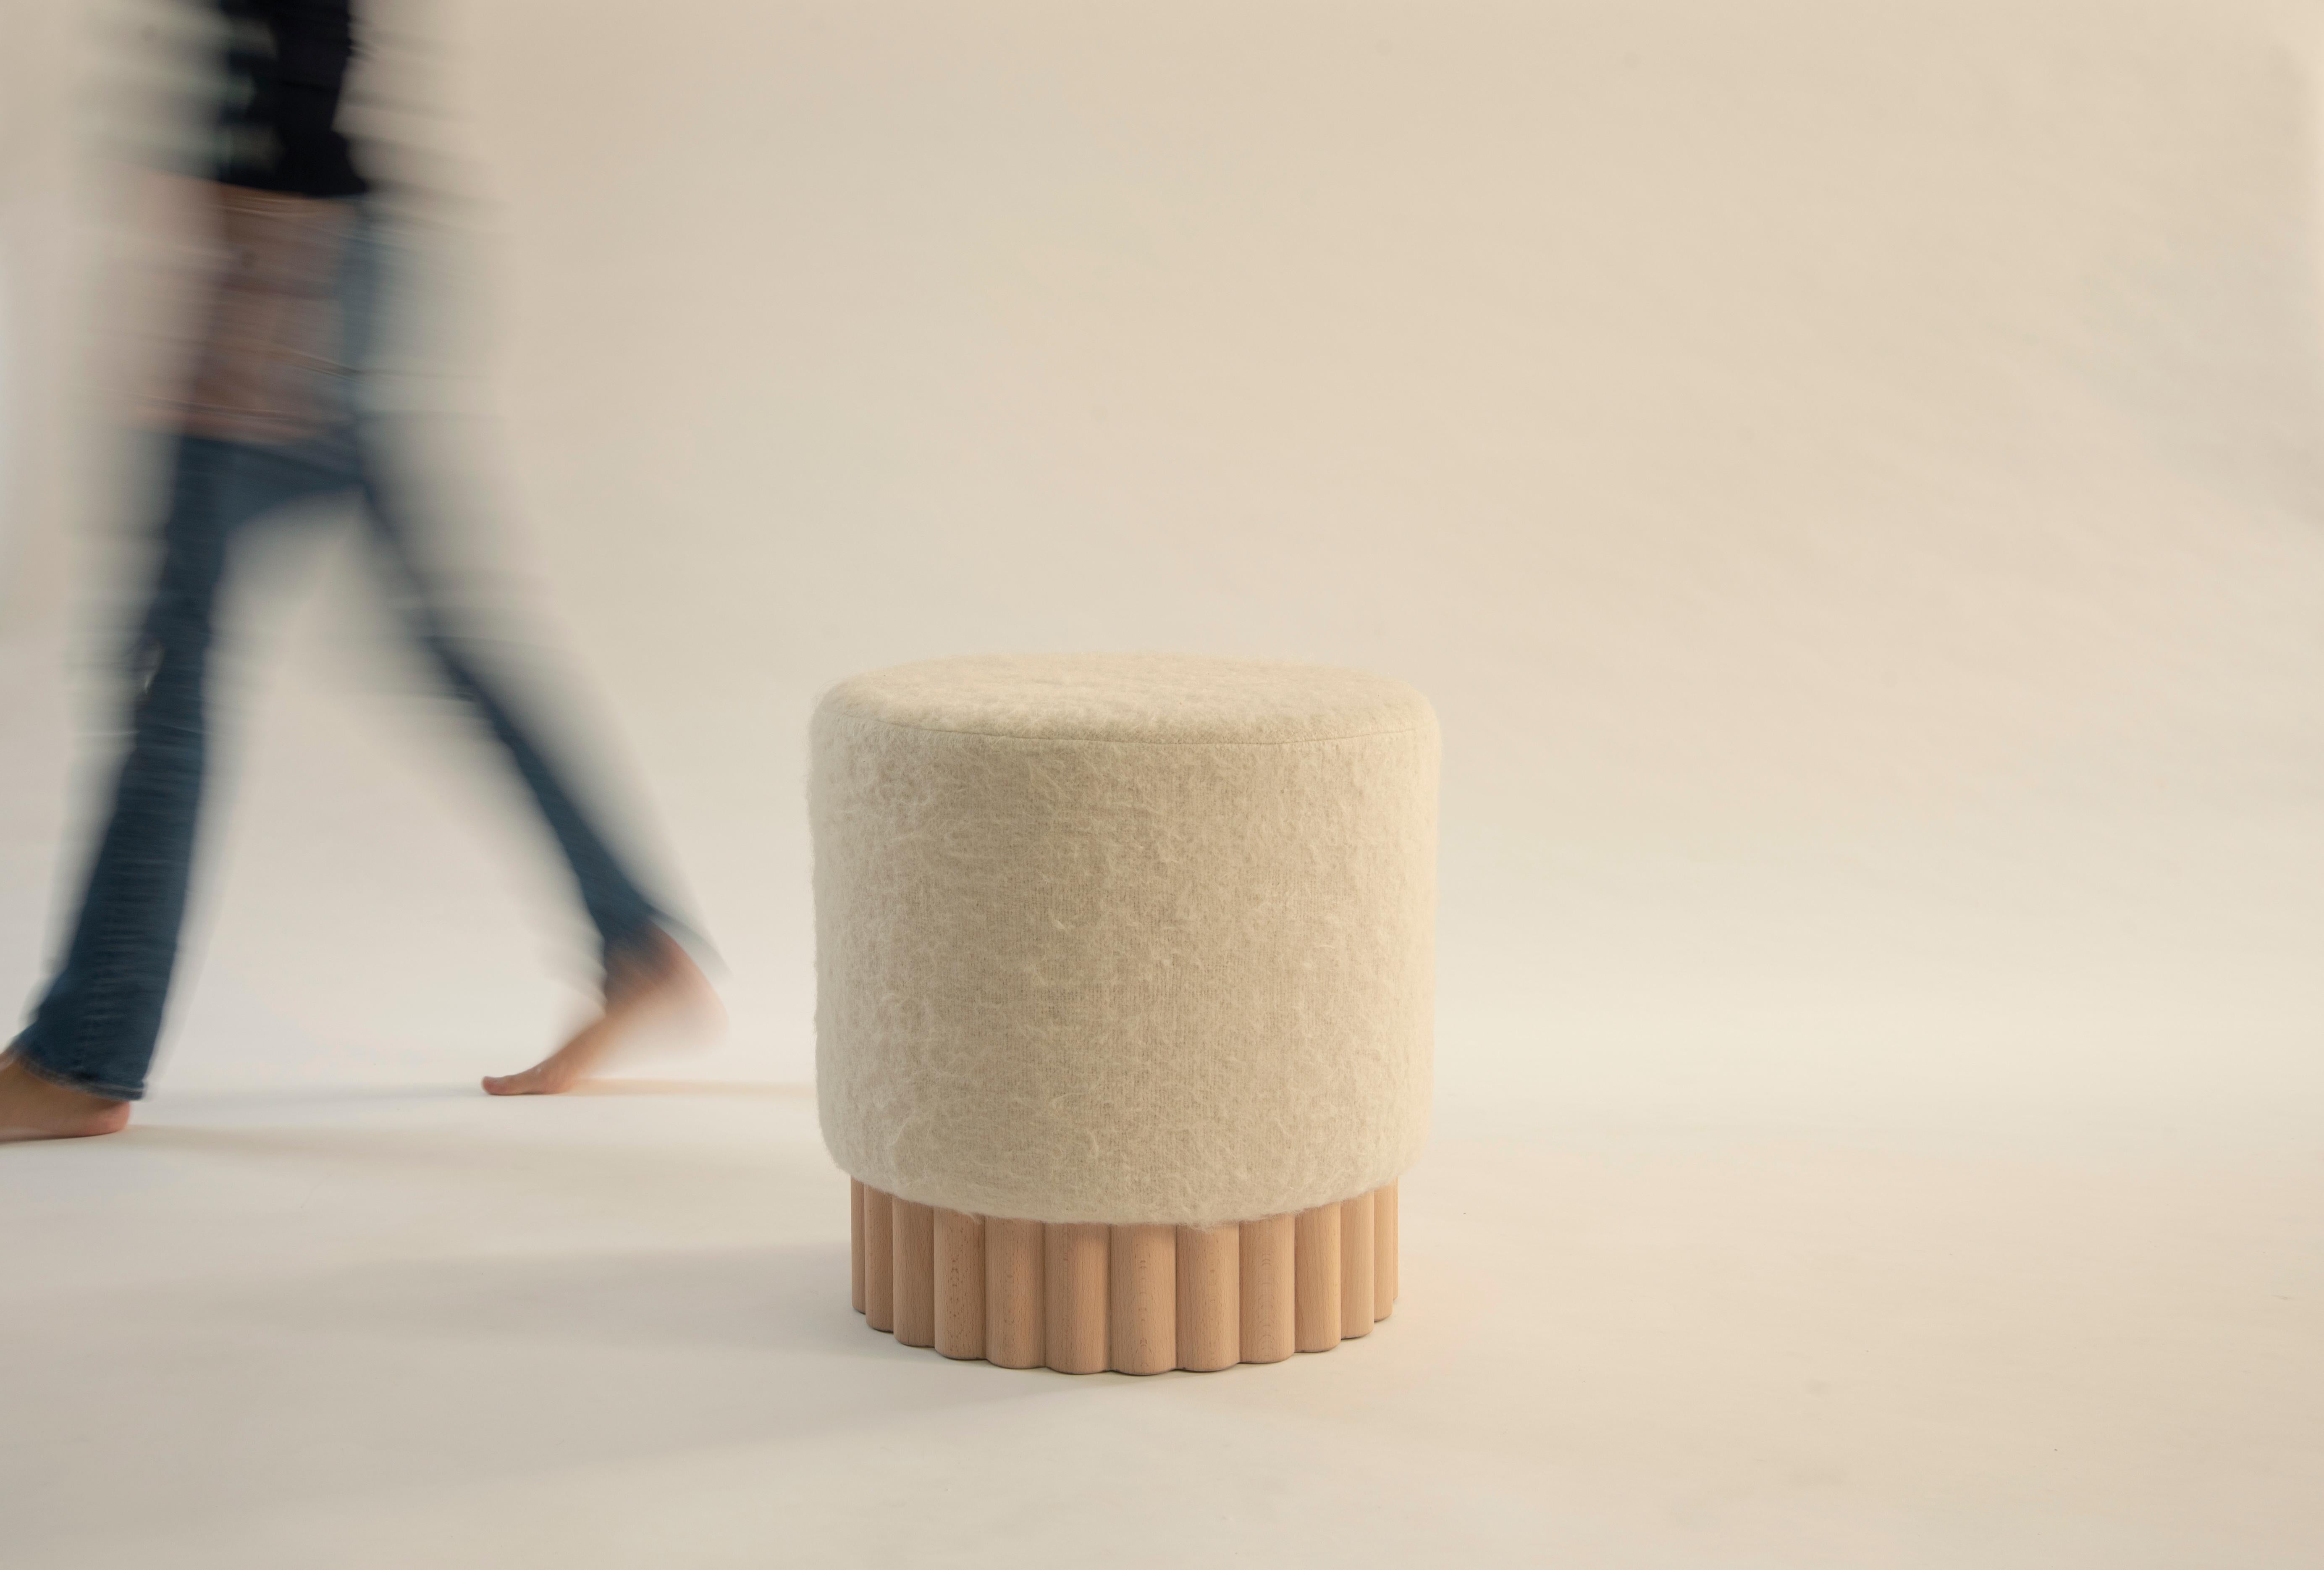 Hand-Crafted Loto Pouf, Beech, Tzalam or Blackened Oak Wood and Leather or Fabric